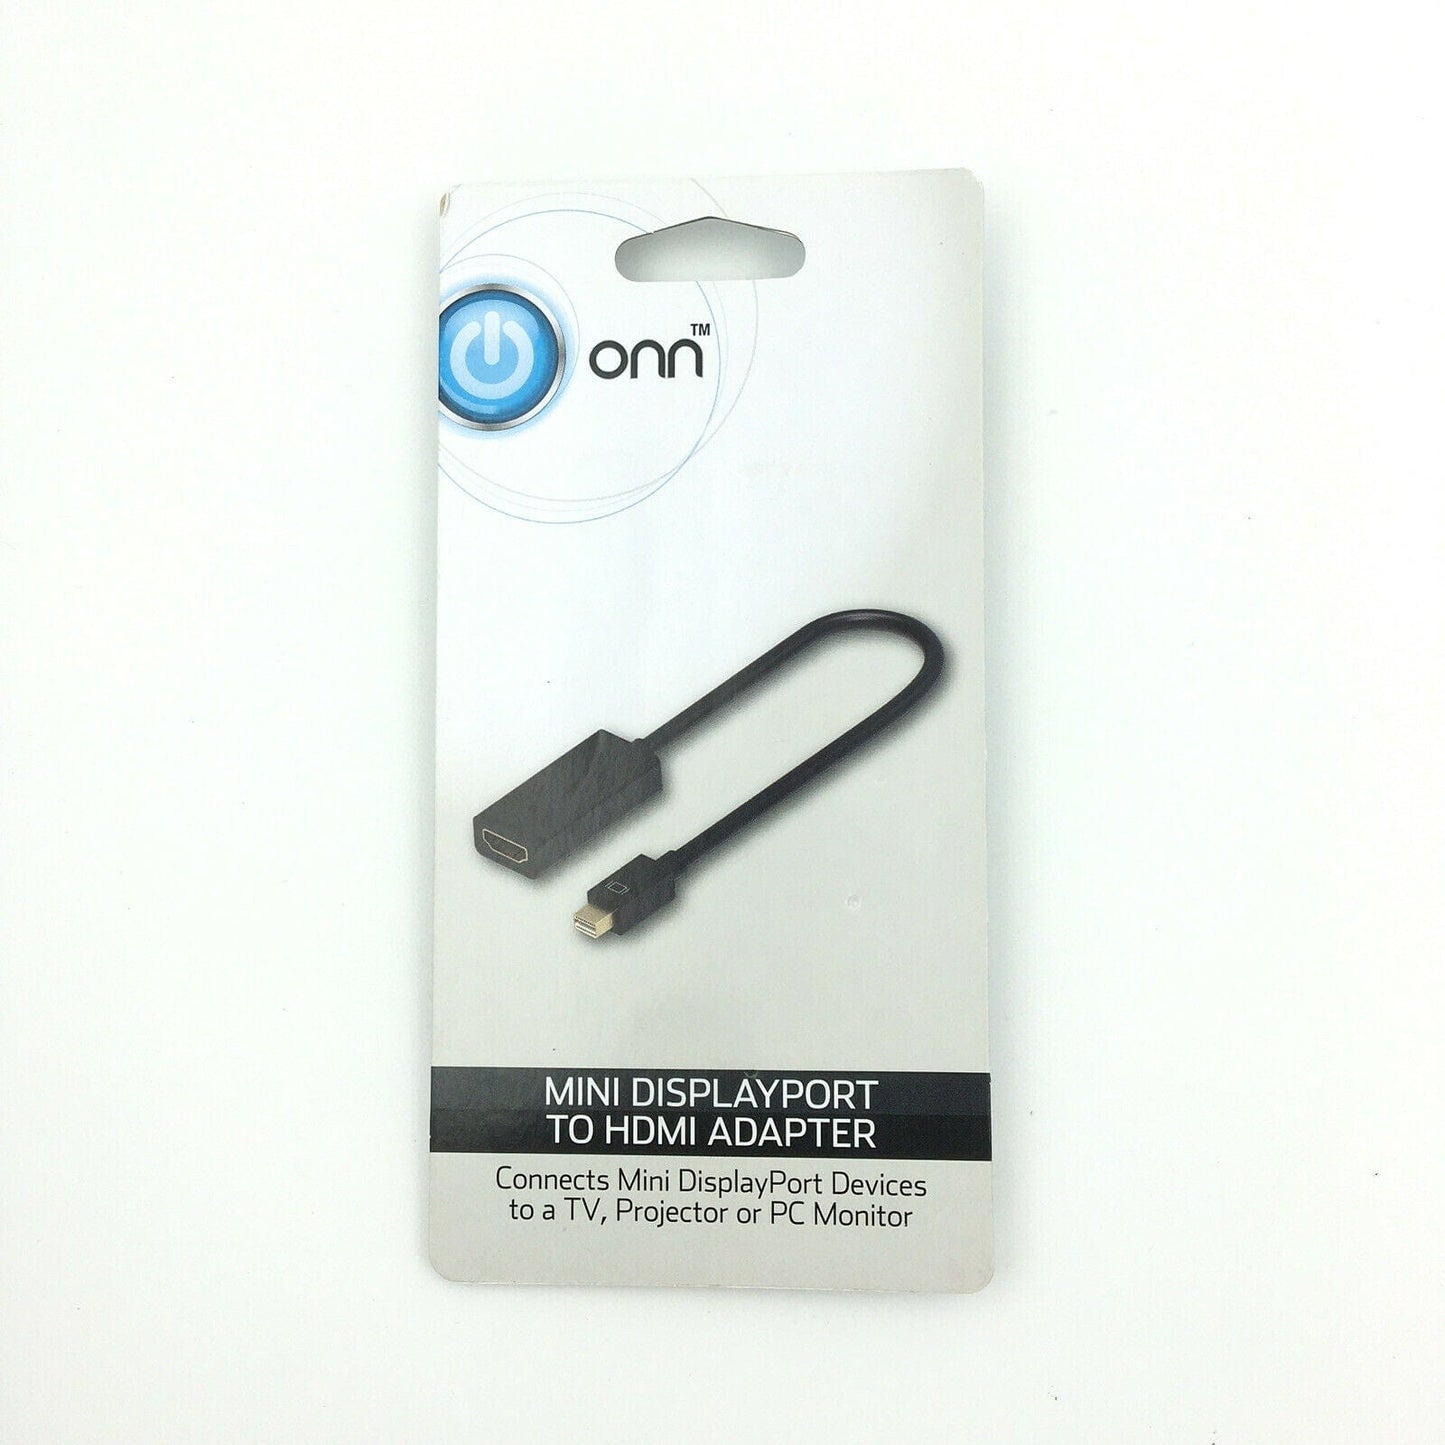 Onn Mini Displayport to HDMI Adapter For Device To TV Projector PC Monitor